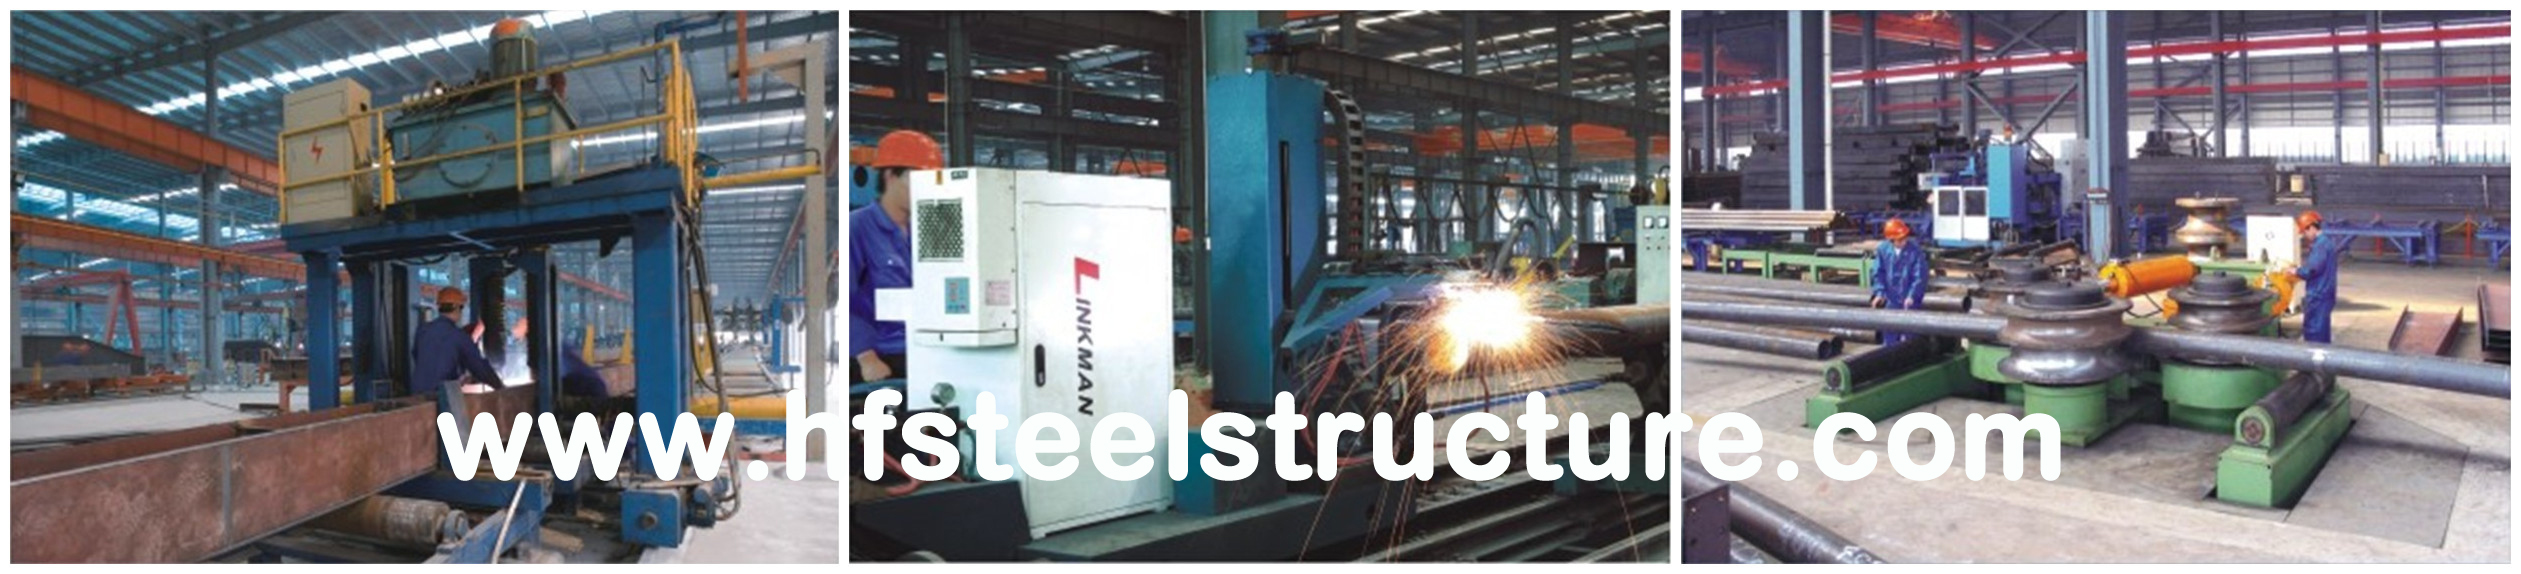 Plasma And Oxyfuel Cutting, Fire Proof And Rust Proof Commercial Steel Buildings